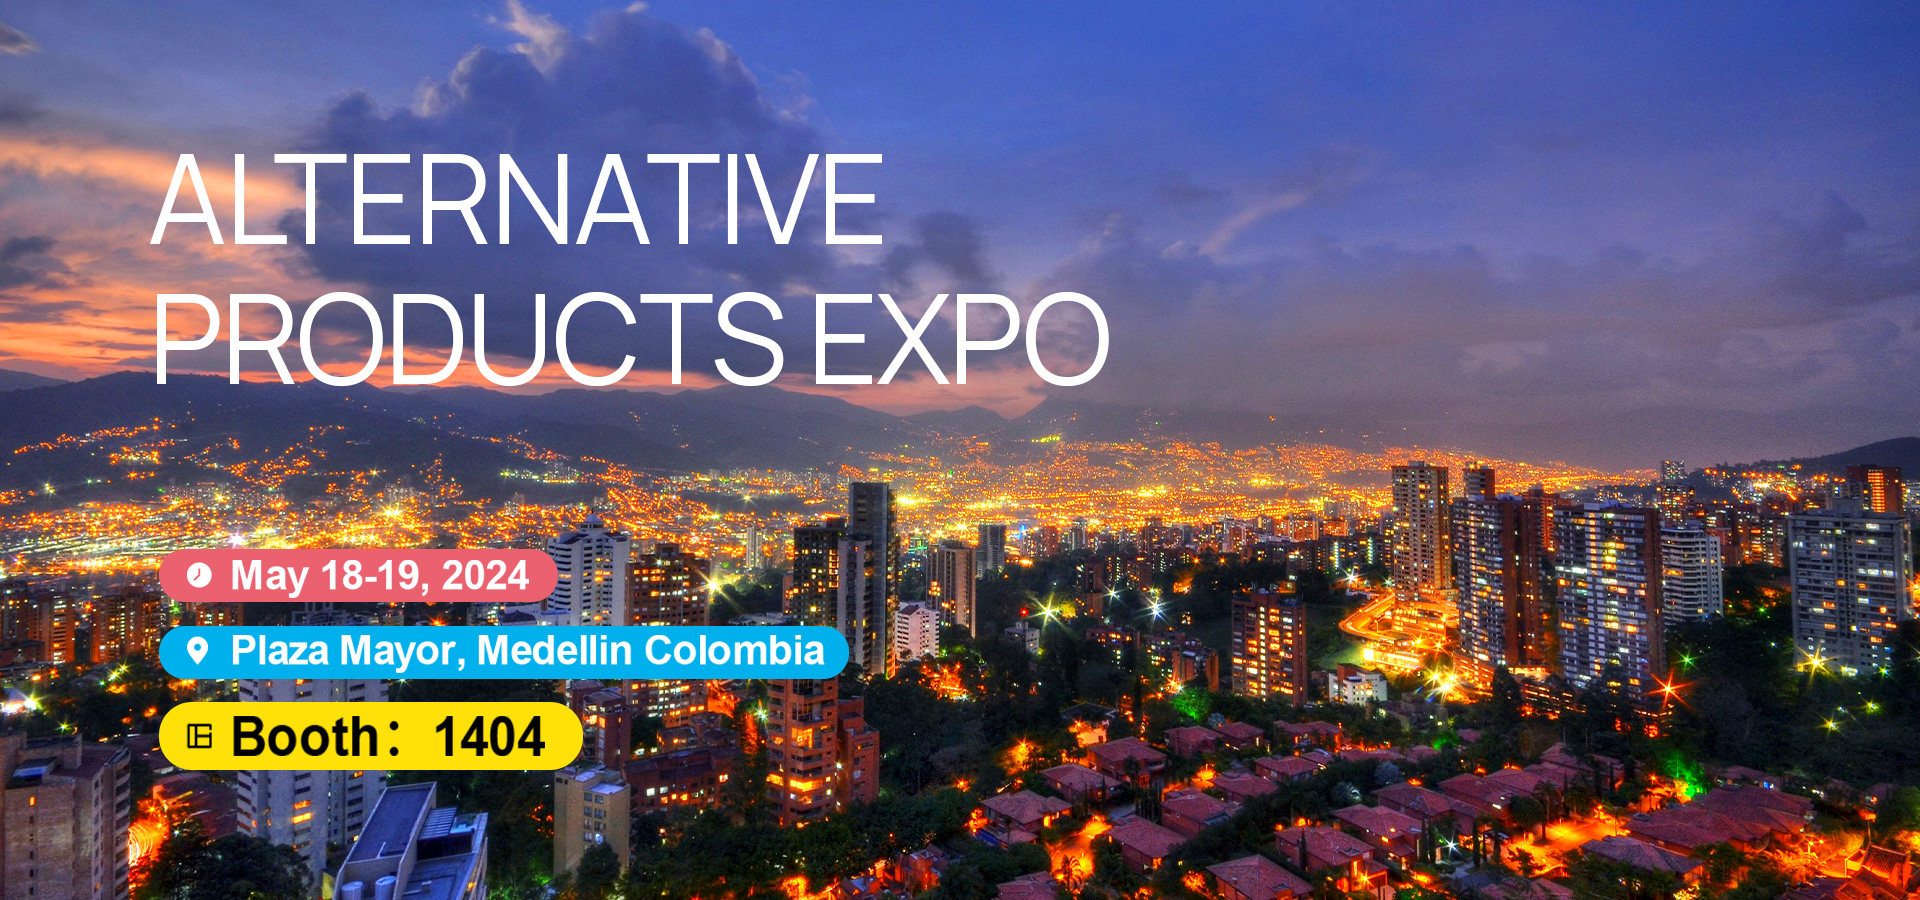 Shine in Colombia, meet DRAGBAR at ALTERNATIVE PRODUCTS EXPO 2024缩略图